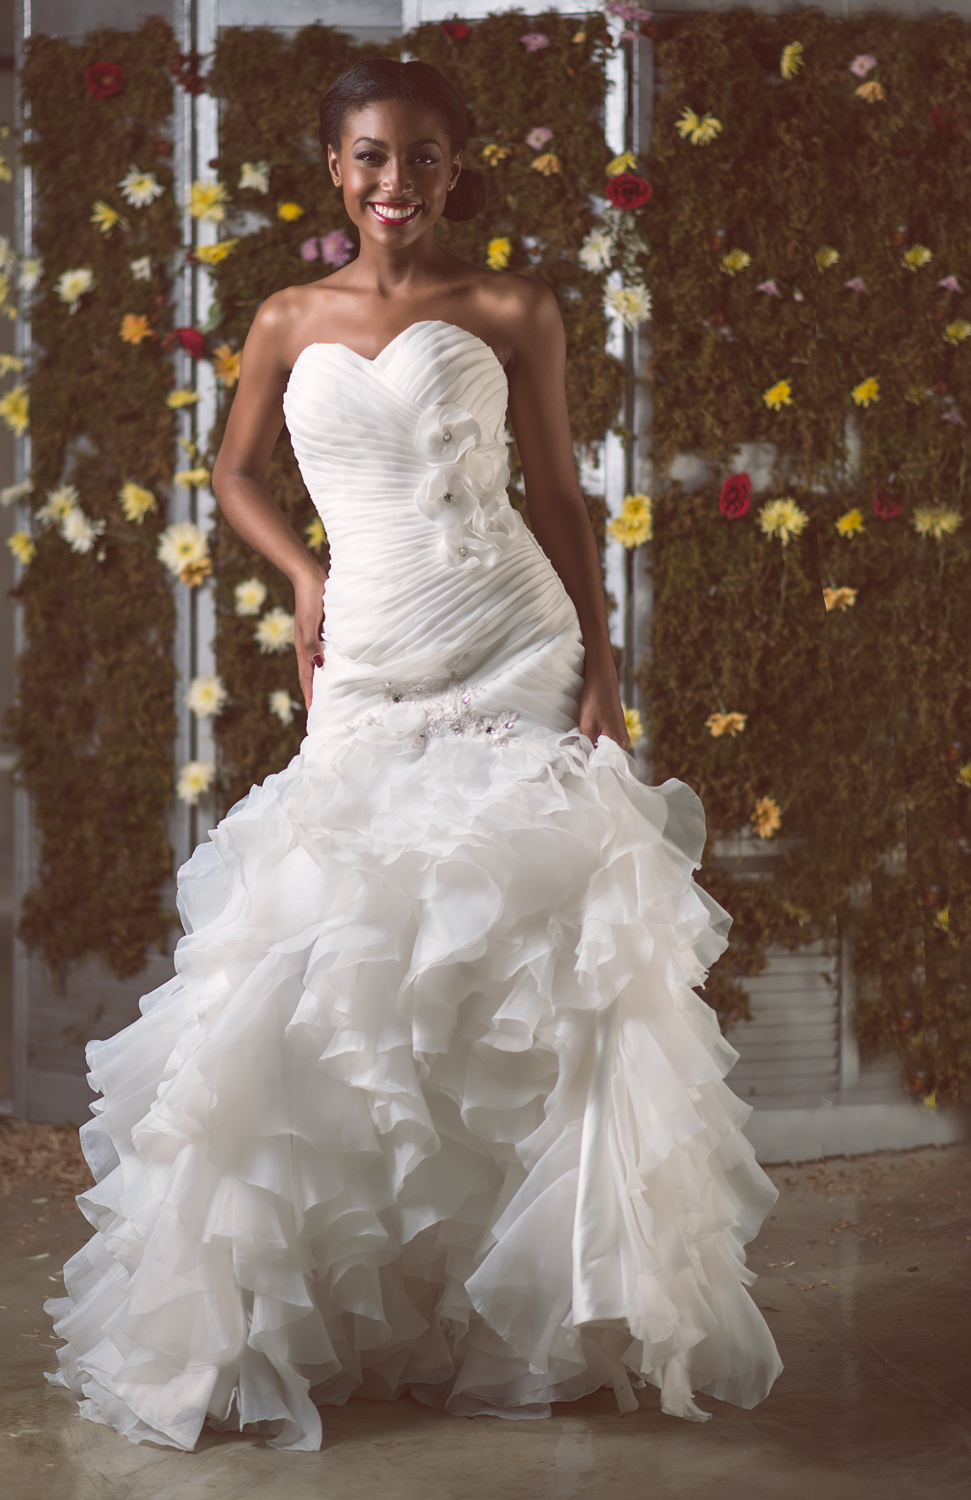 Custom Wedding Dress Collection - MeJeanne Couture